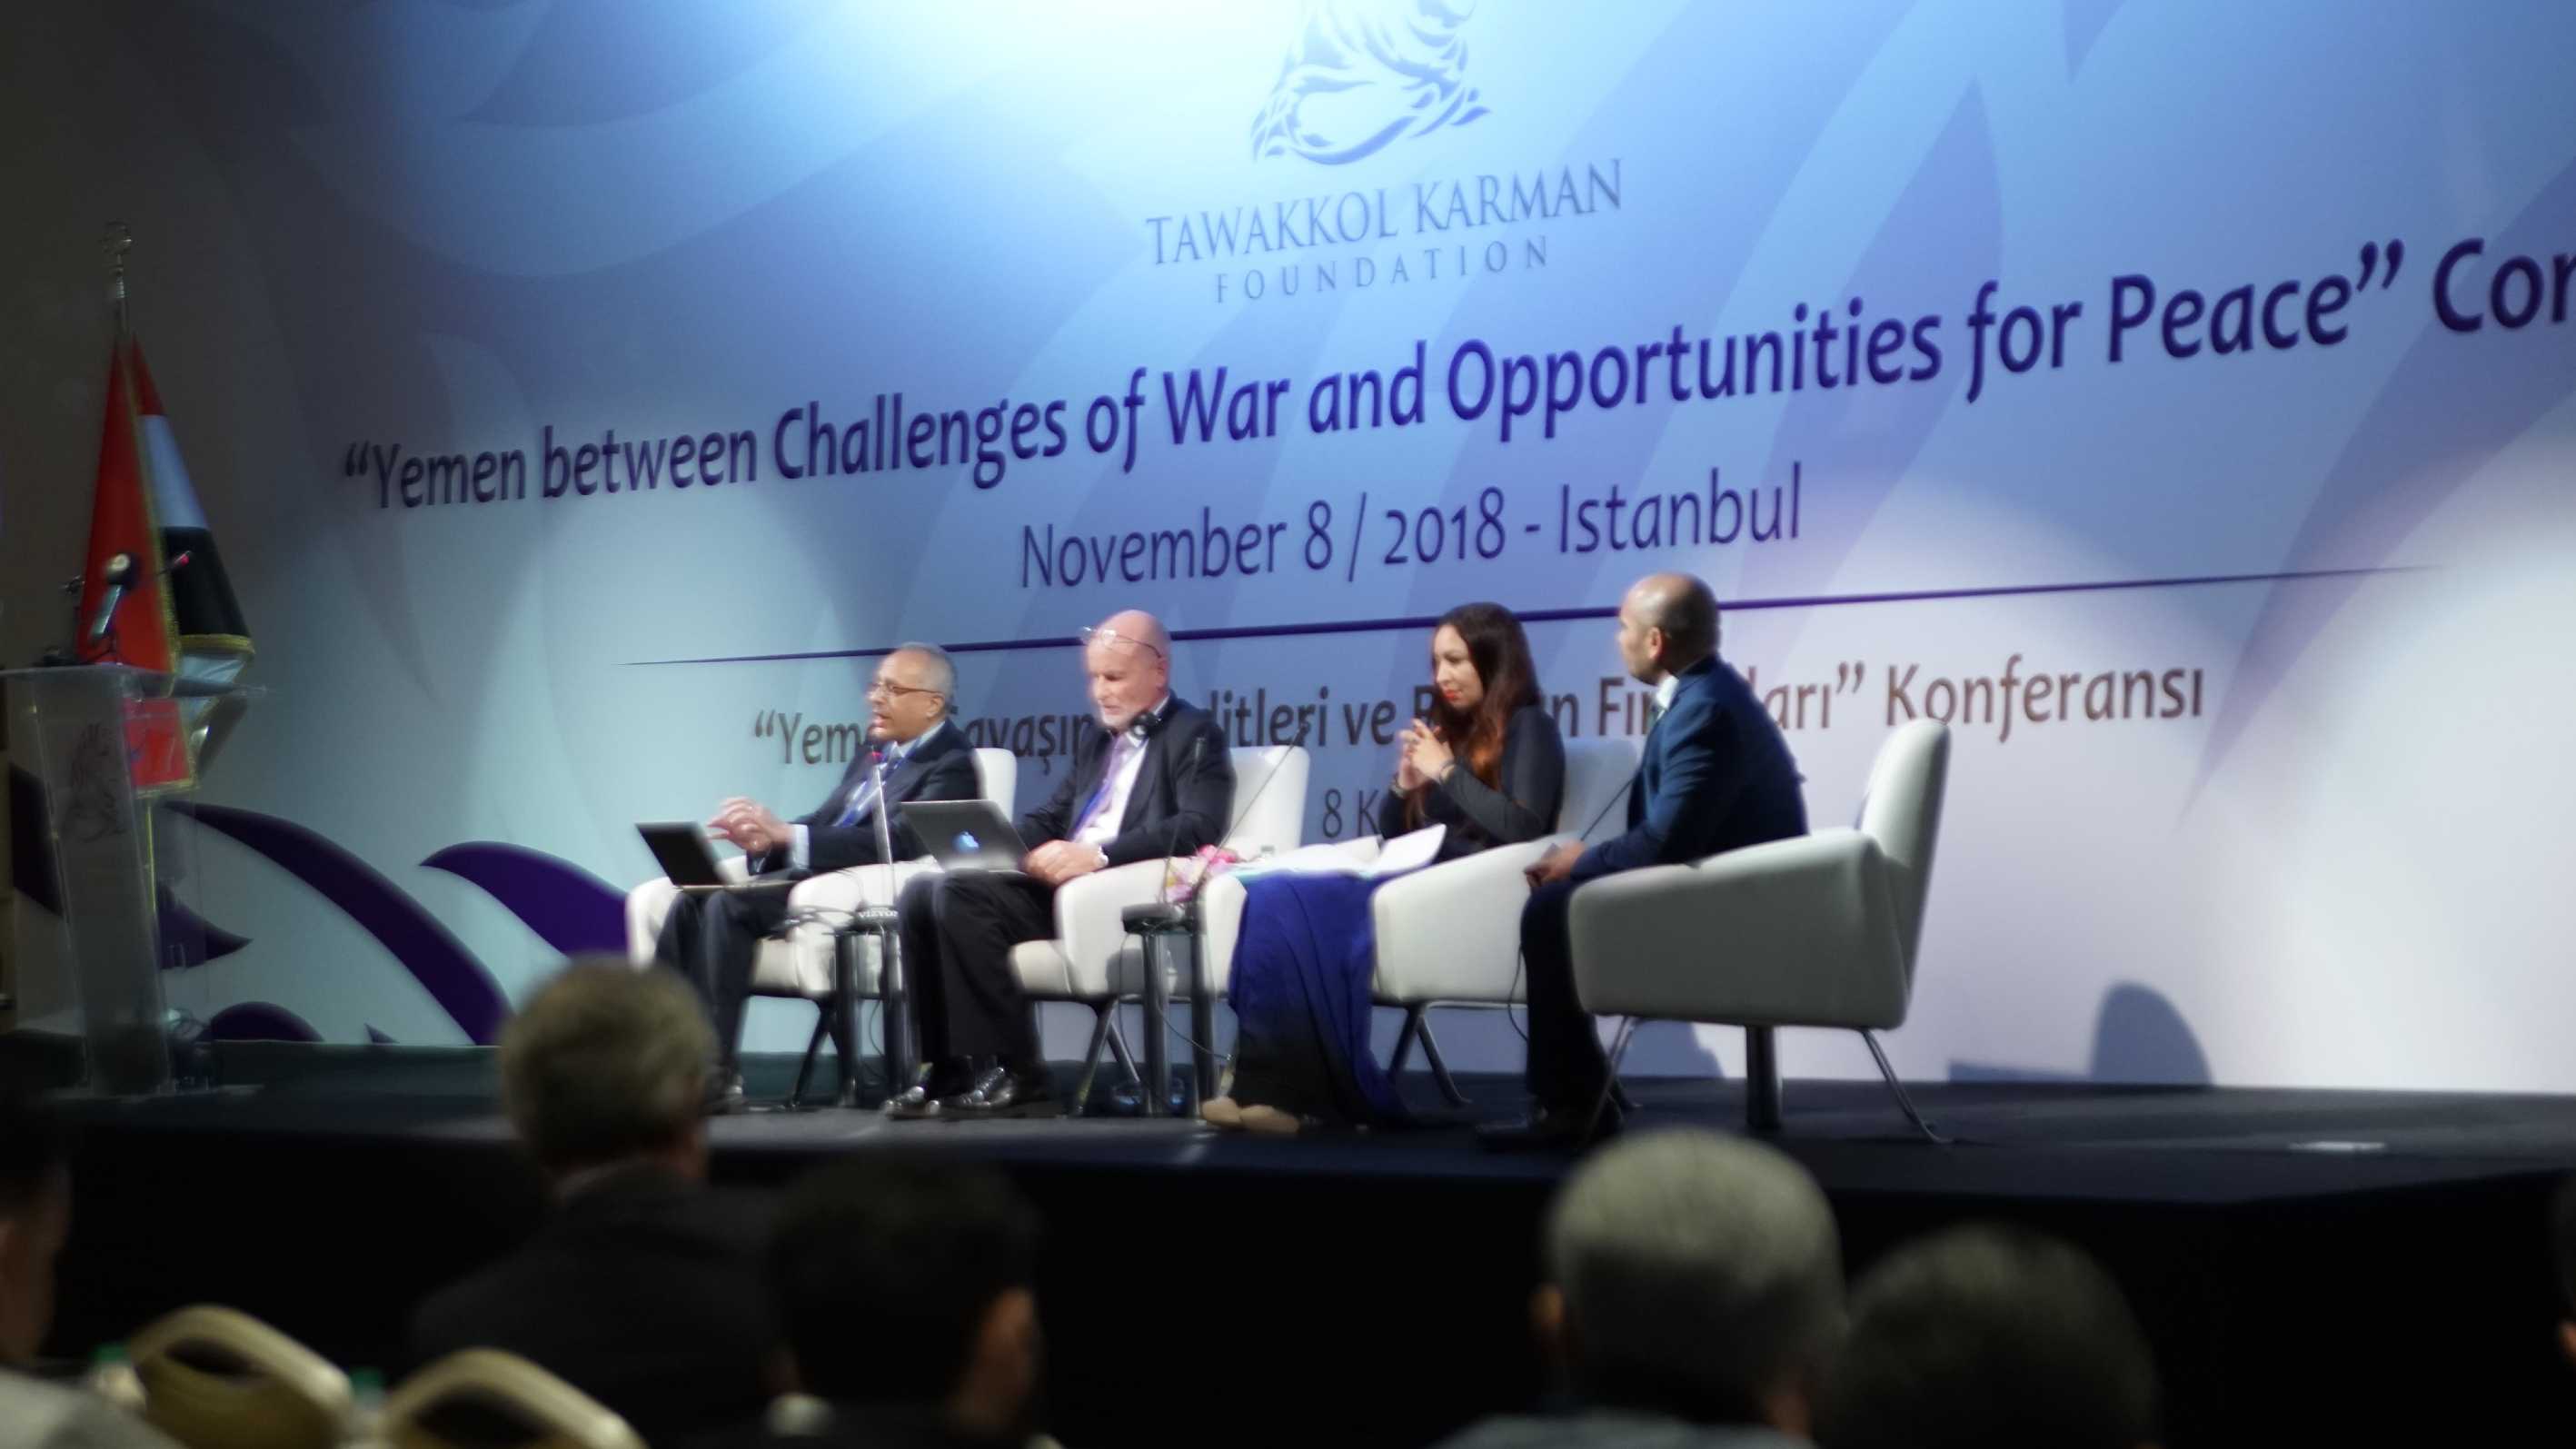 TKF conference in Istanbul Supports Calls to stop the War in Yemen and Withdraw Arms from the Militias